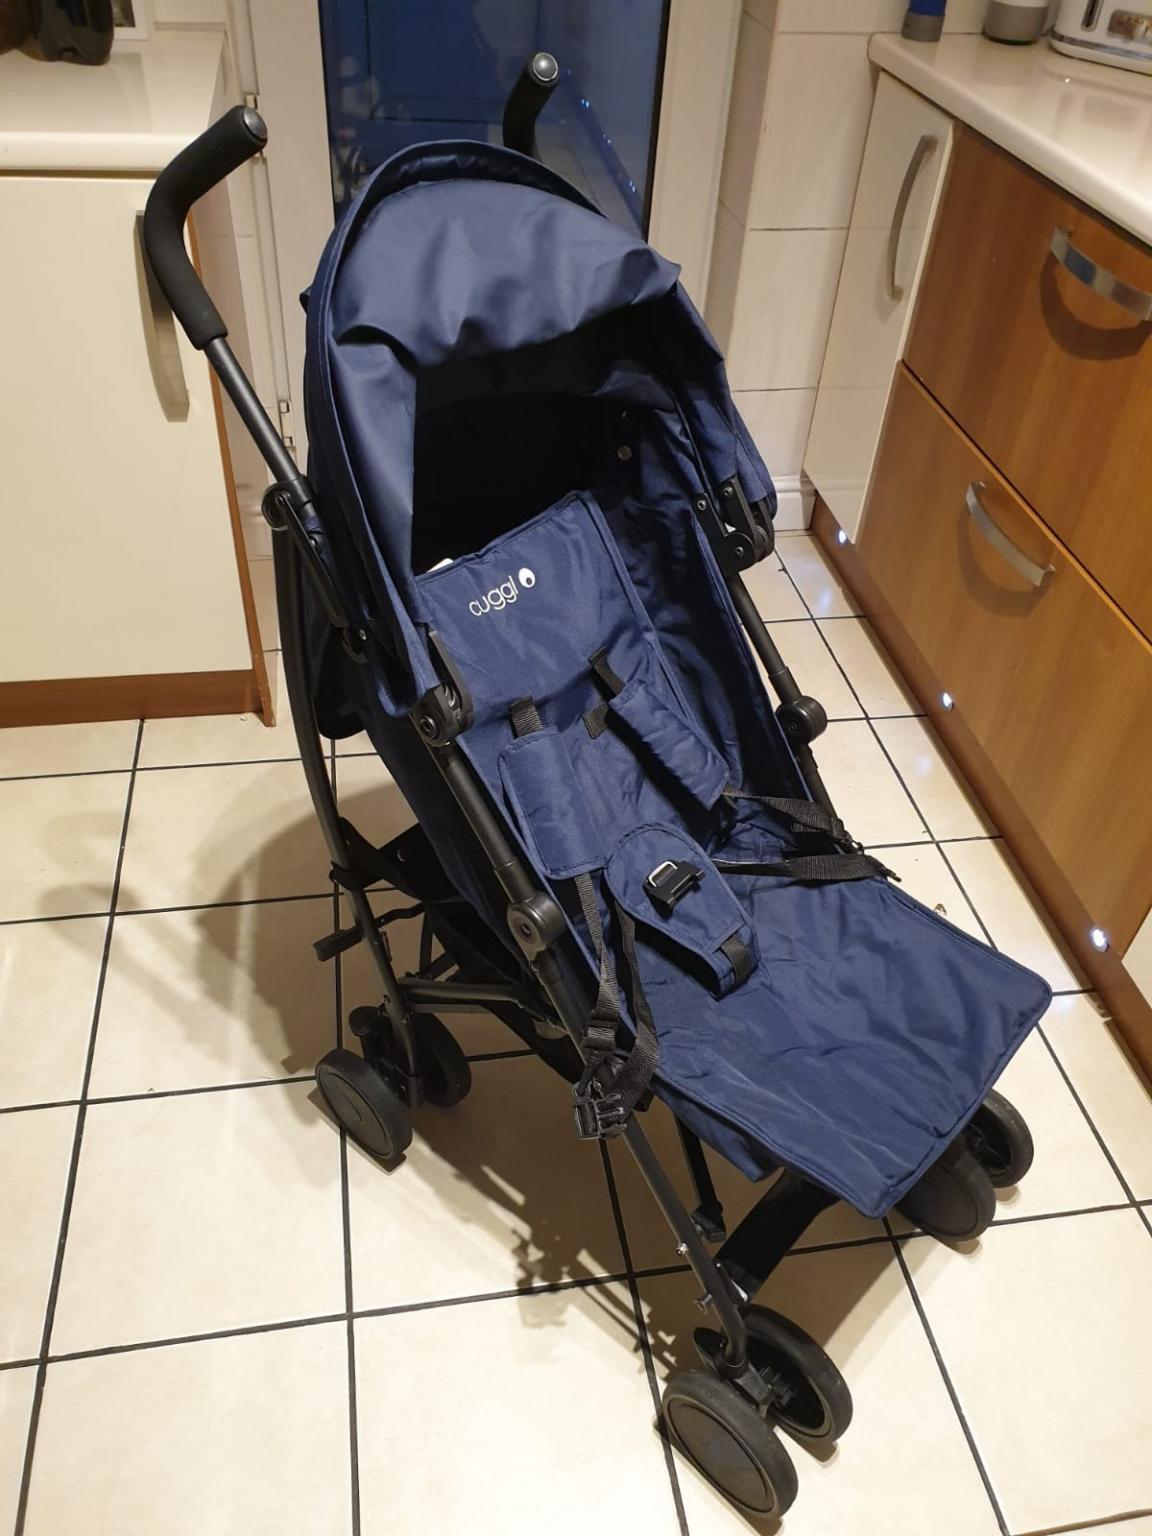 cuggl maple pushchair reviews